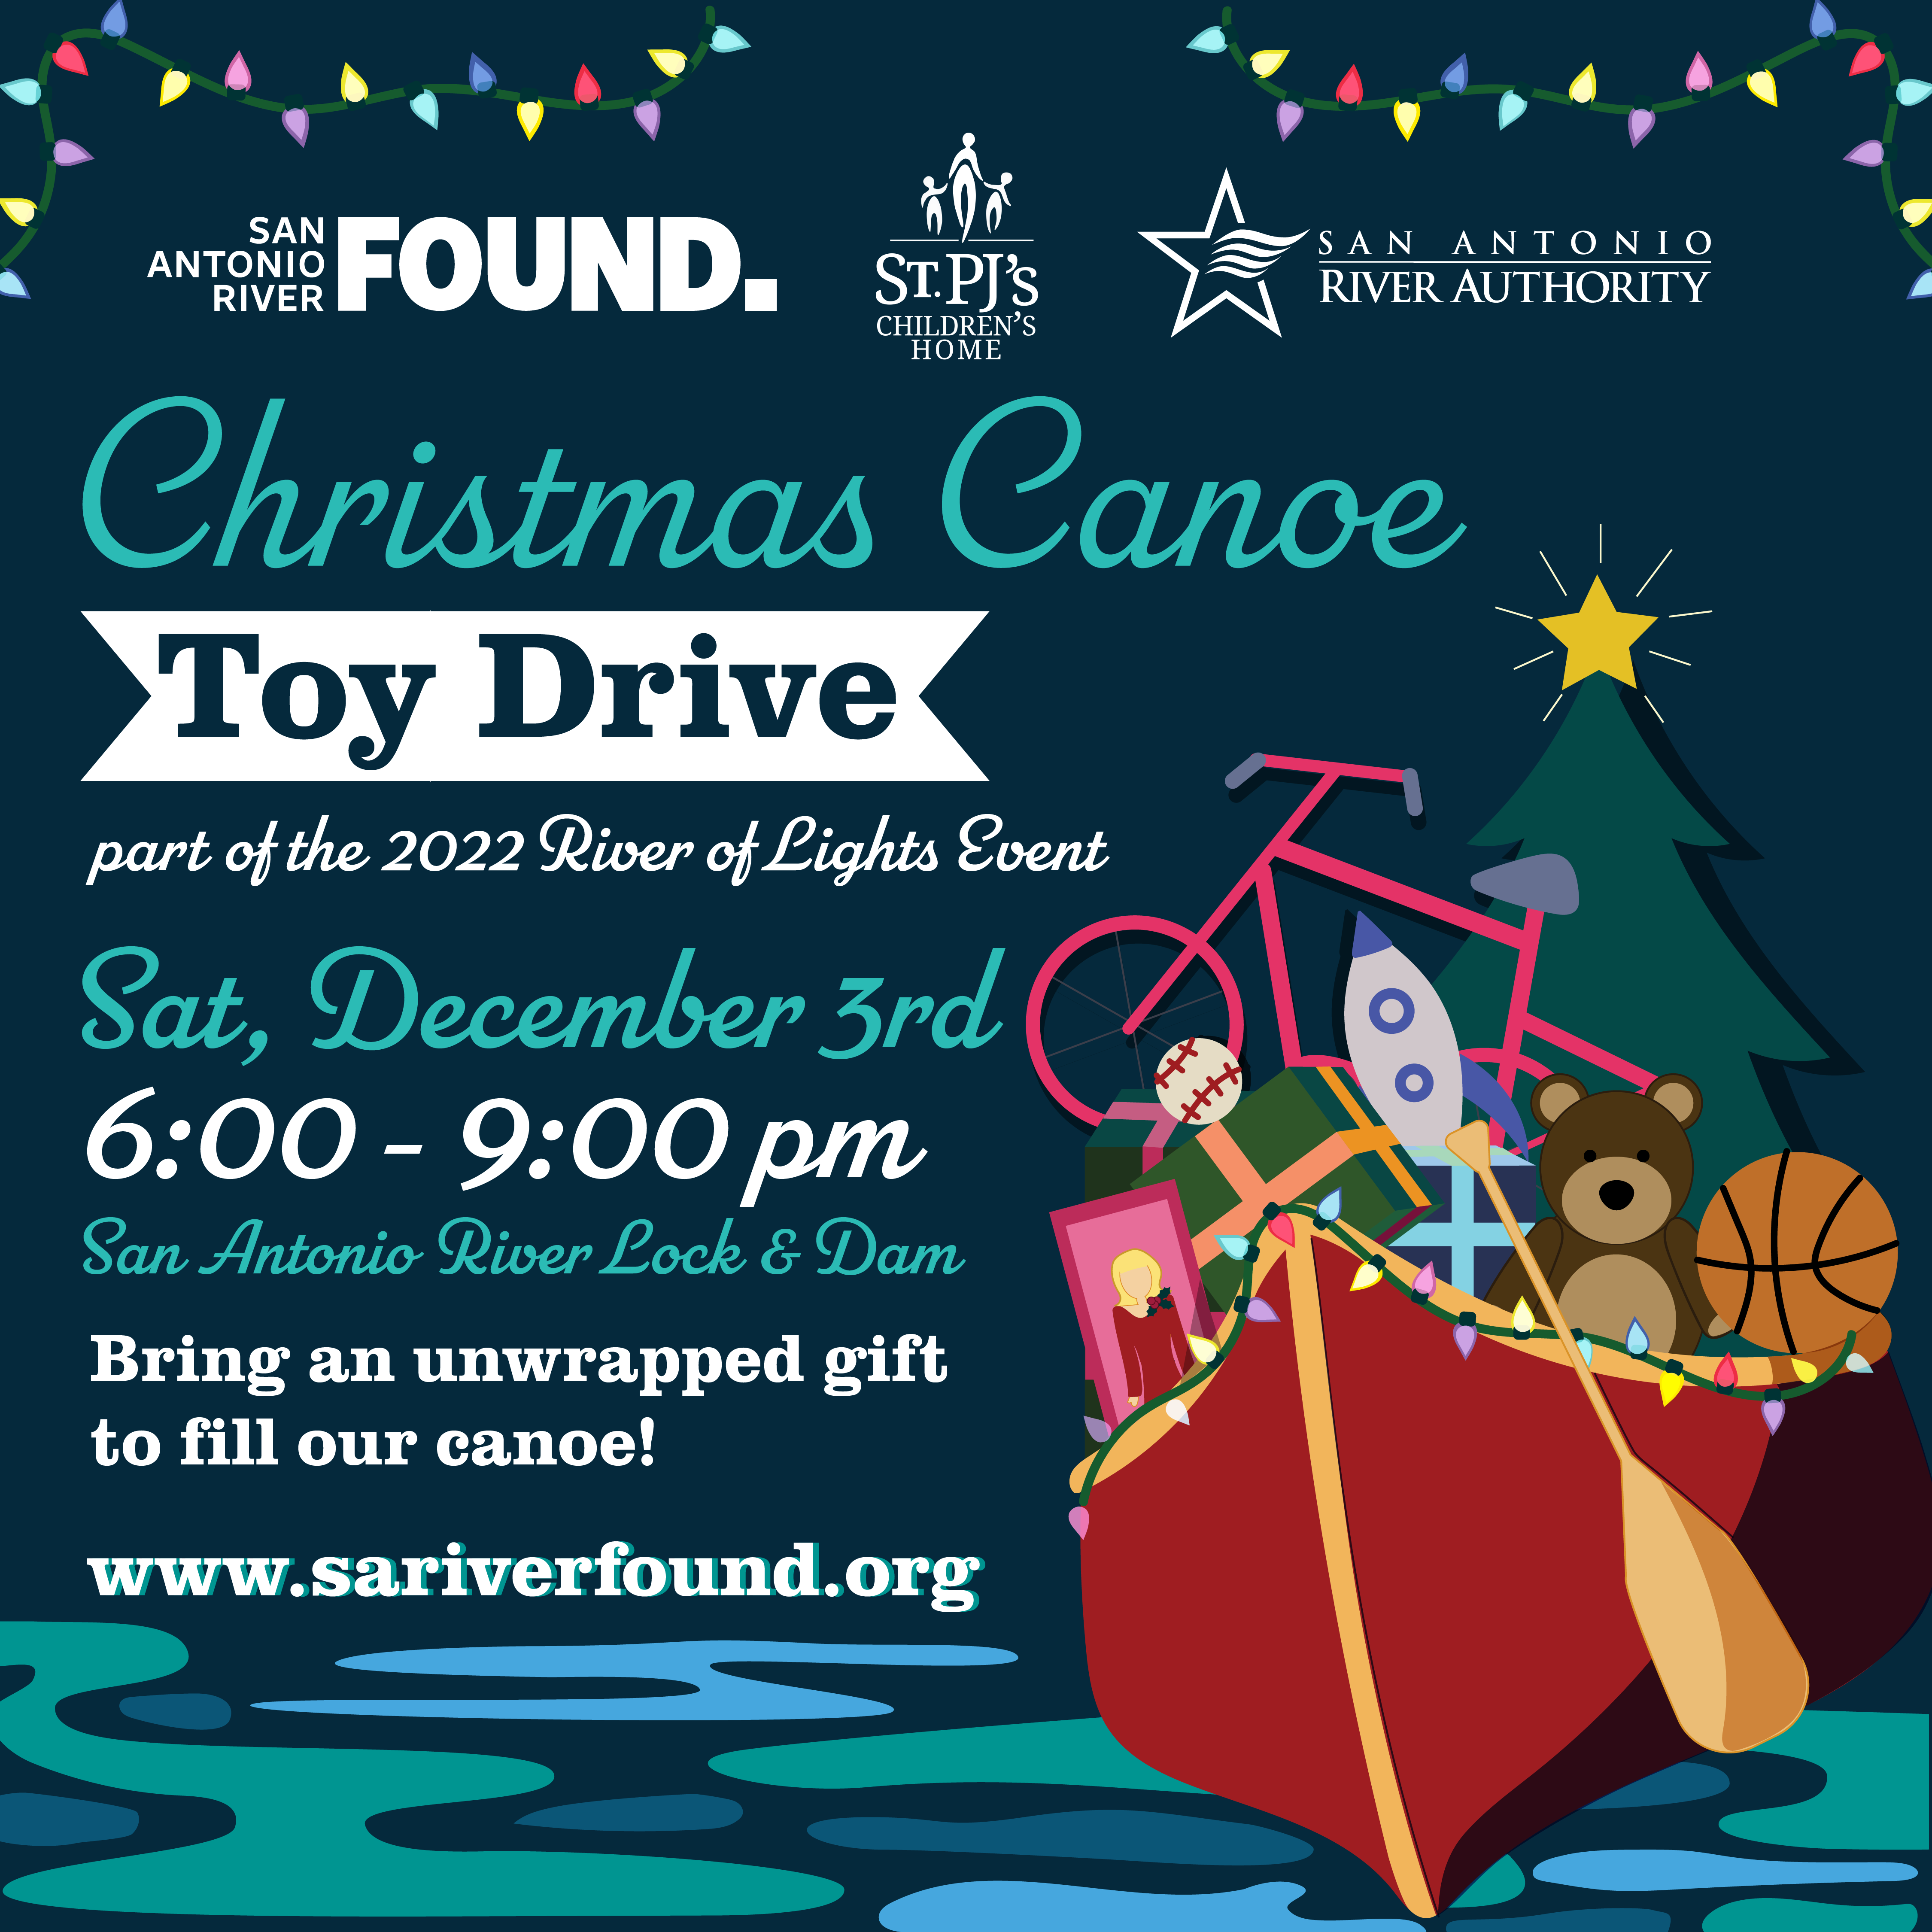 Fill a Christmas Canoe during our Toy Drive!